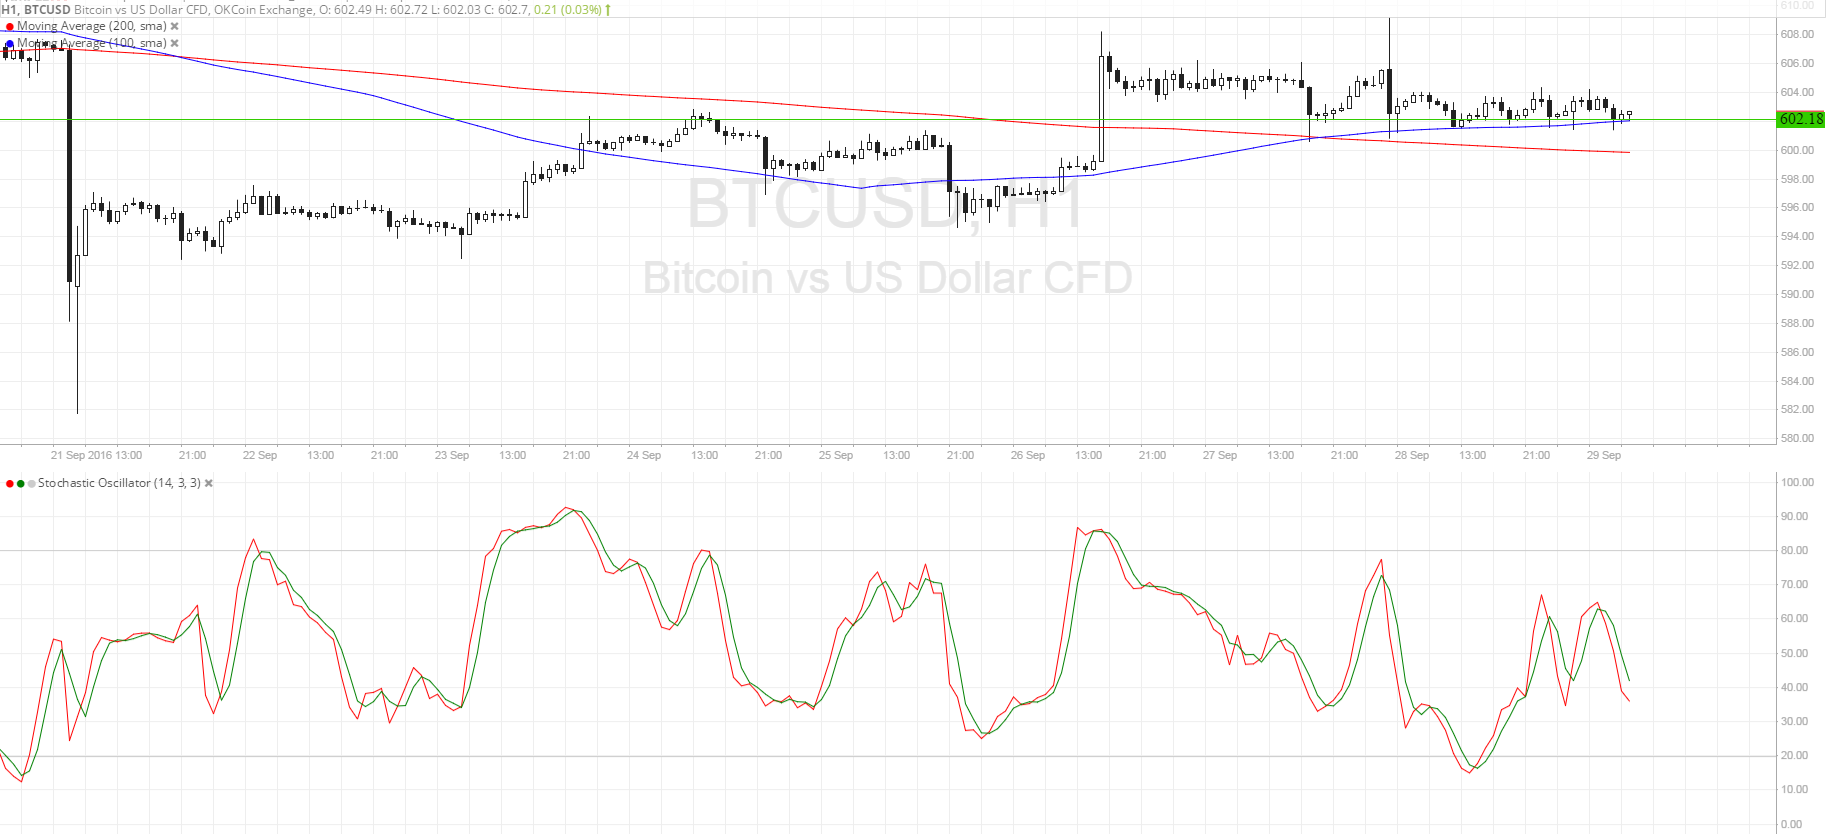 Bitcoin Price Technical Analysis for 09/29/2016 - Sitting on Resistance Turned Support